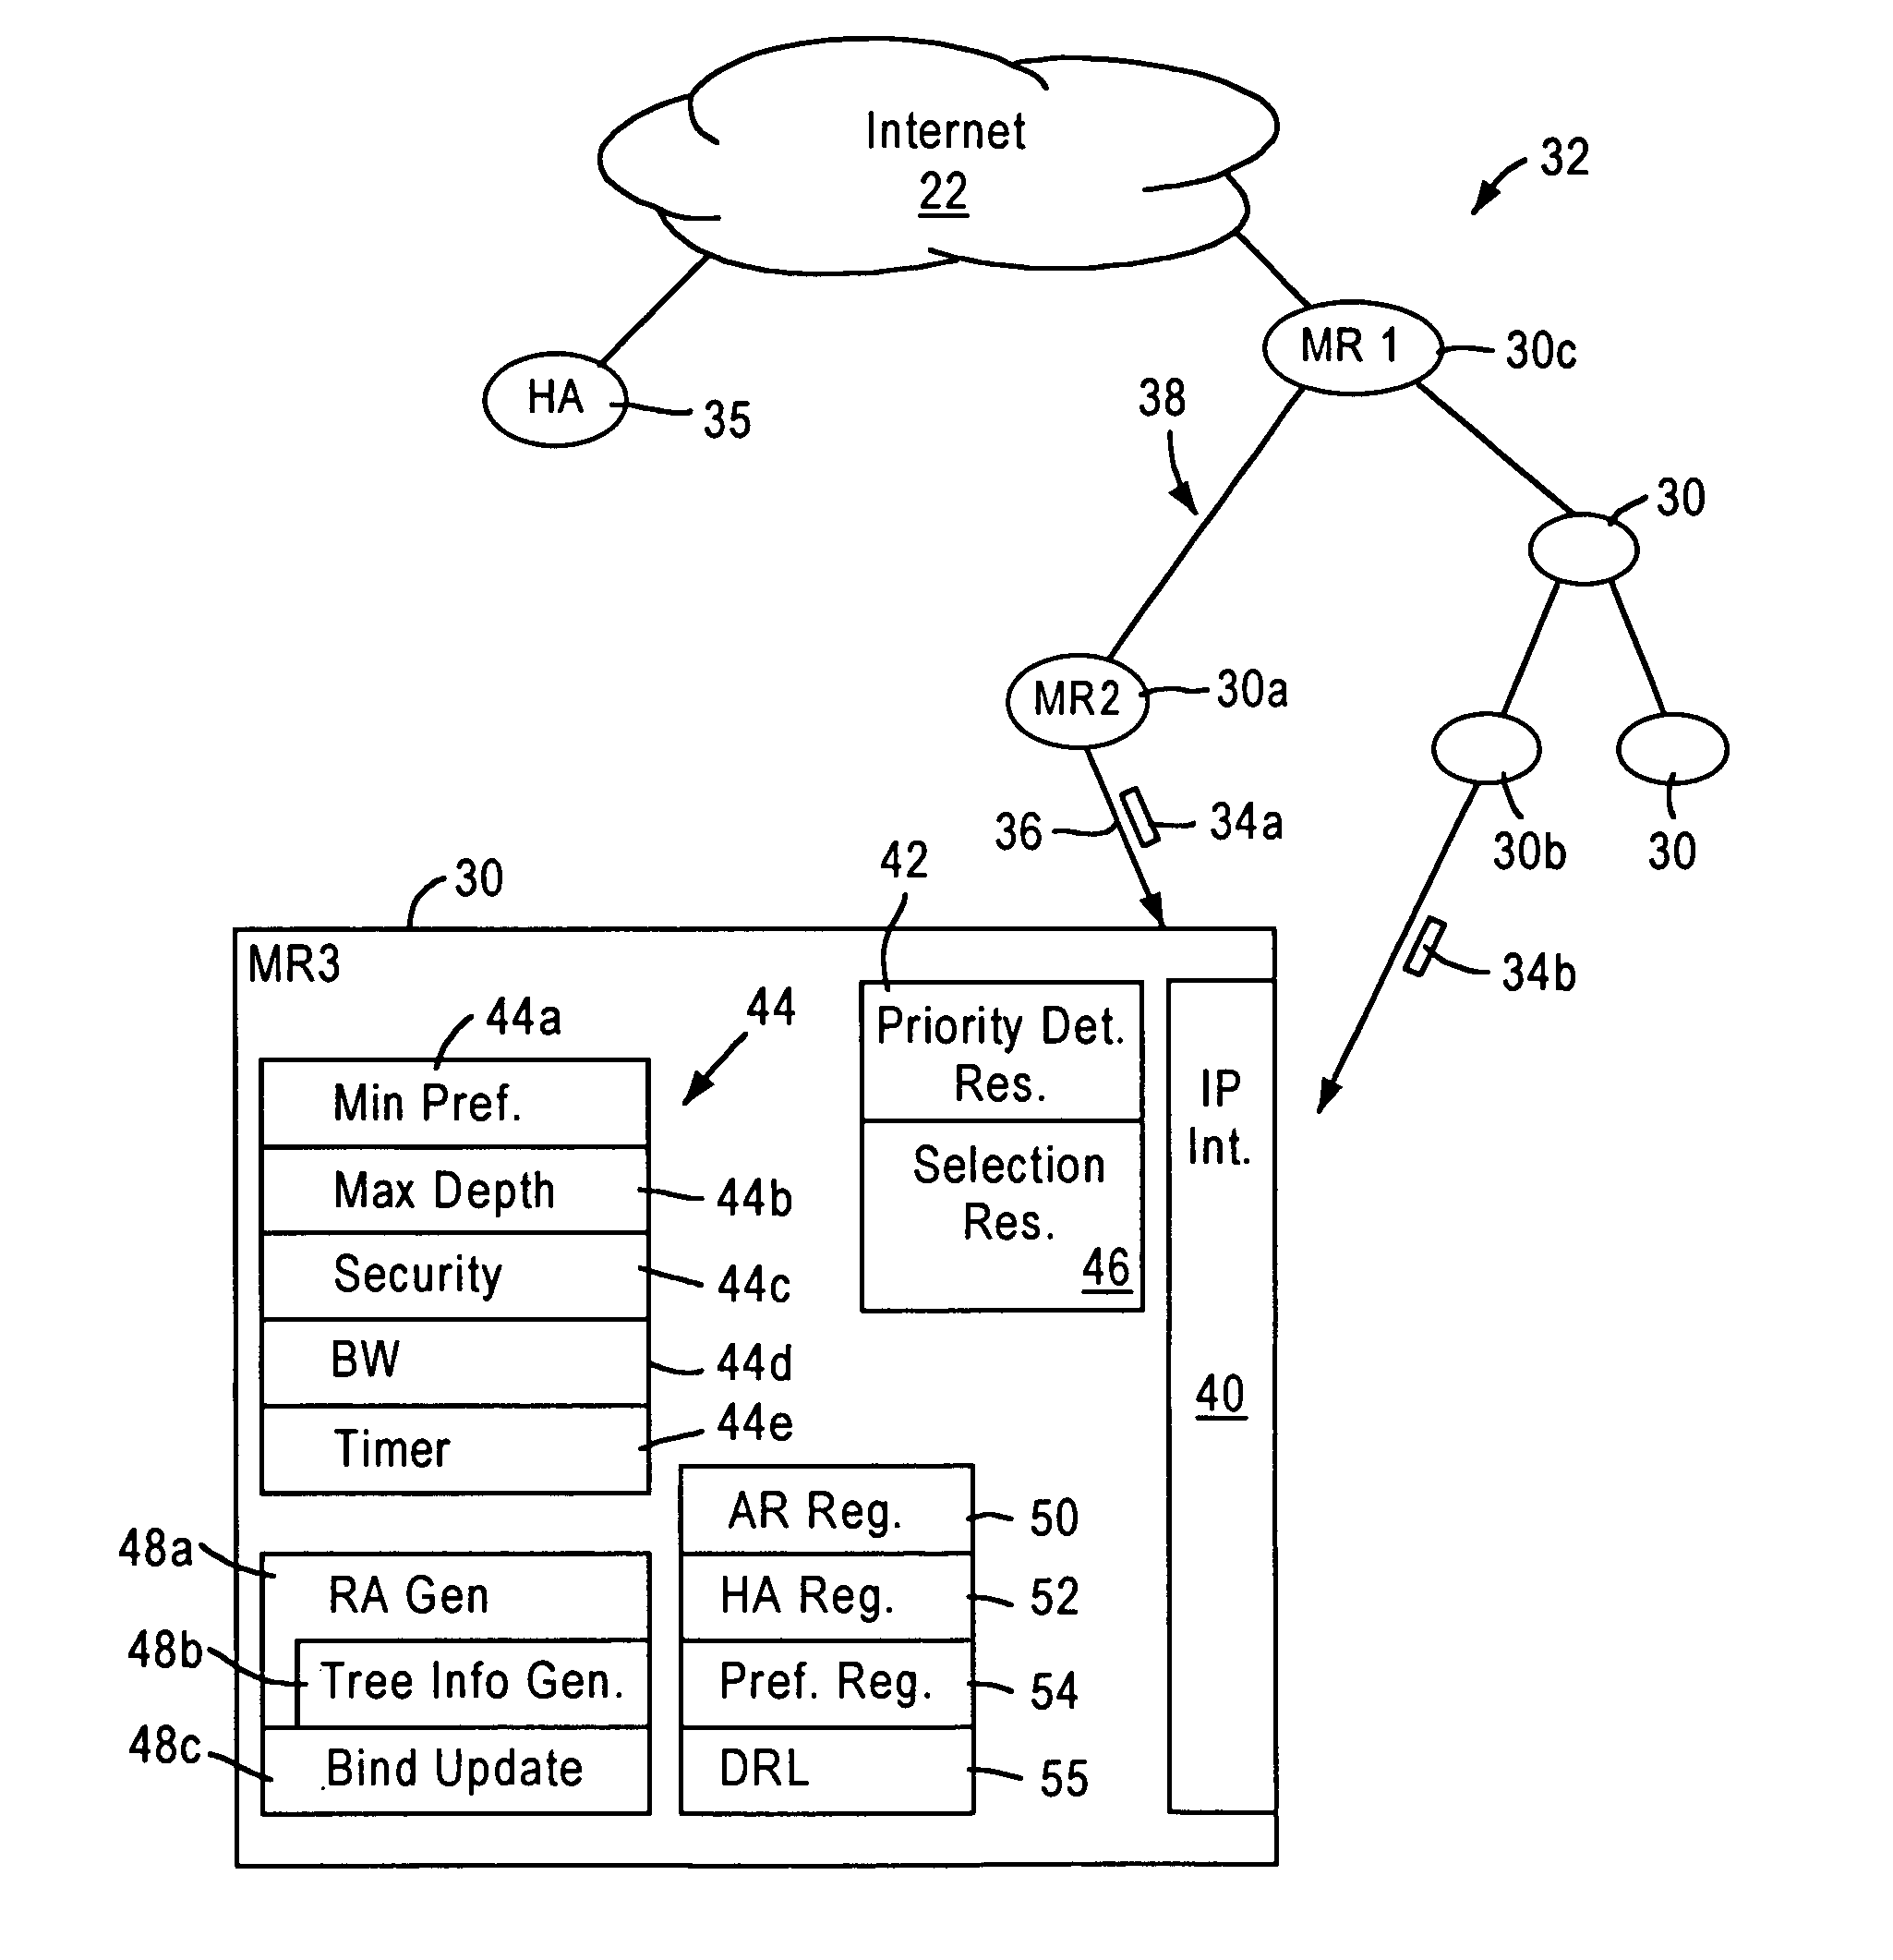 Arrangement for router attachments between roaming mobile routers in a mobile network